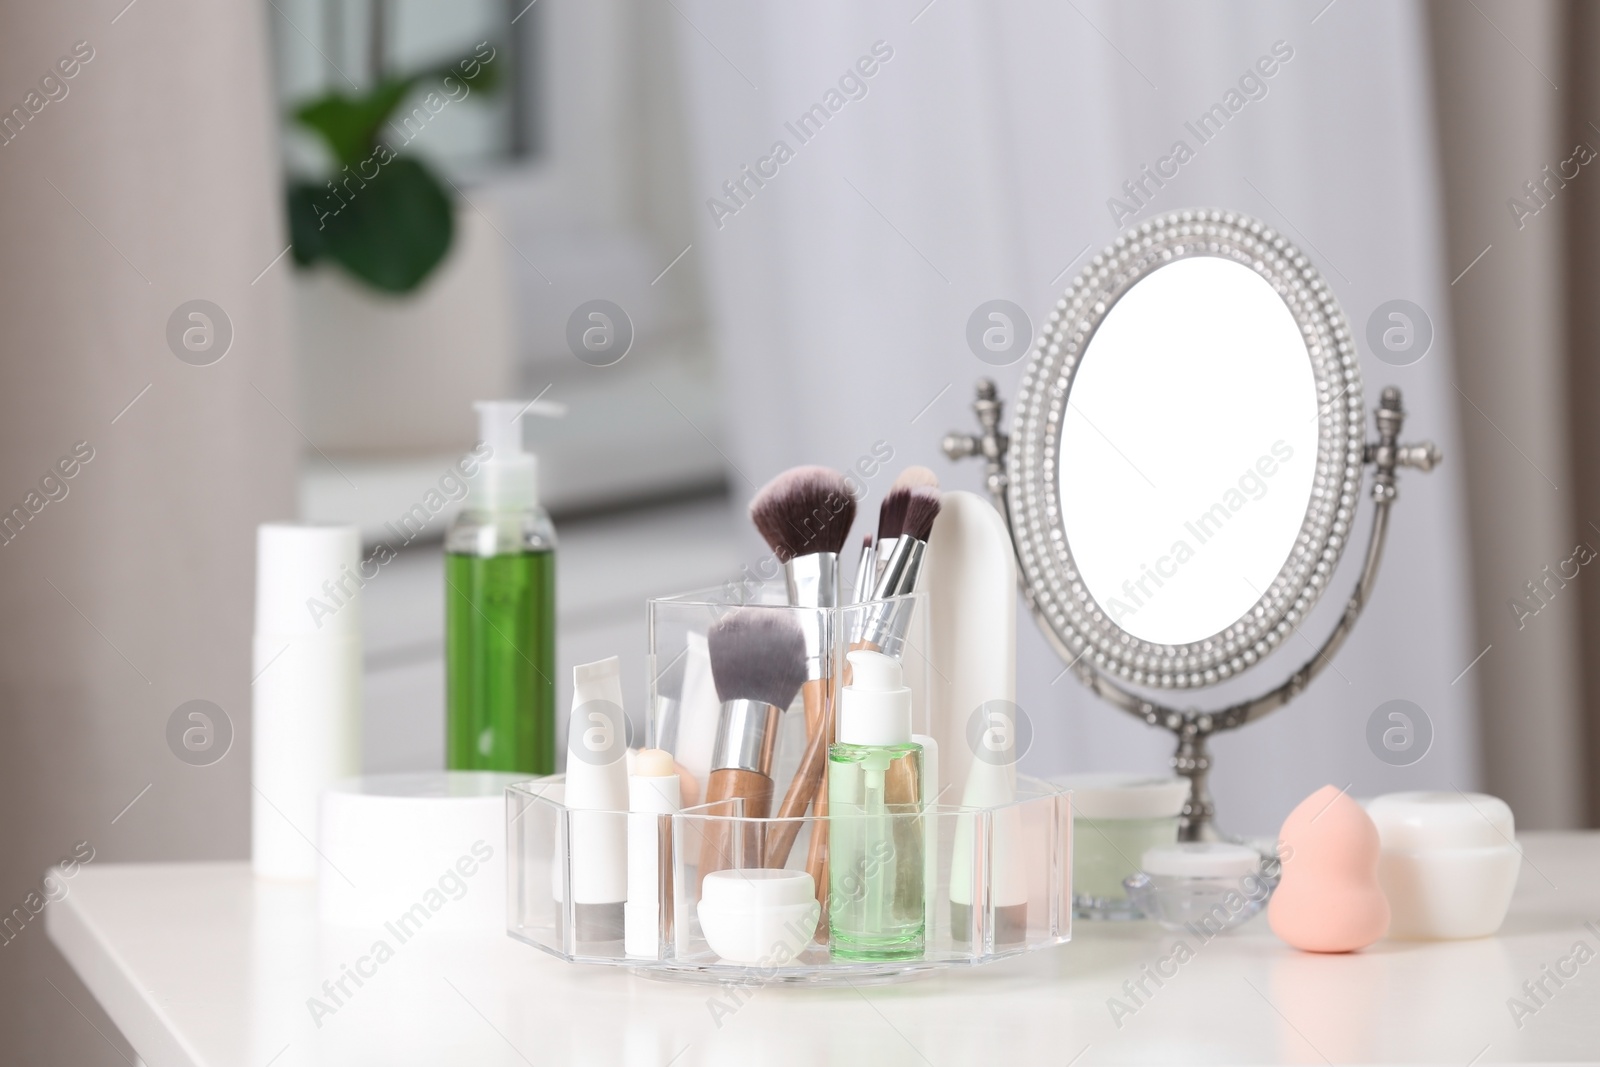 Photo of Cosmetic products and makeup accessories on table against blurred background